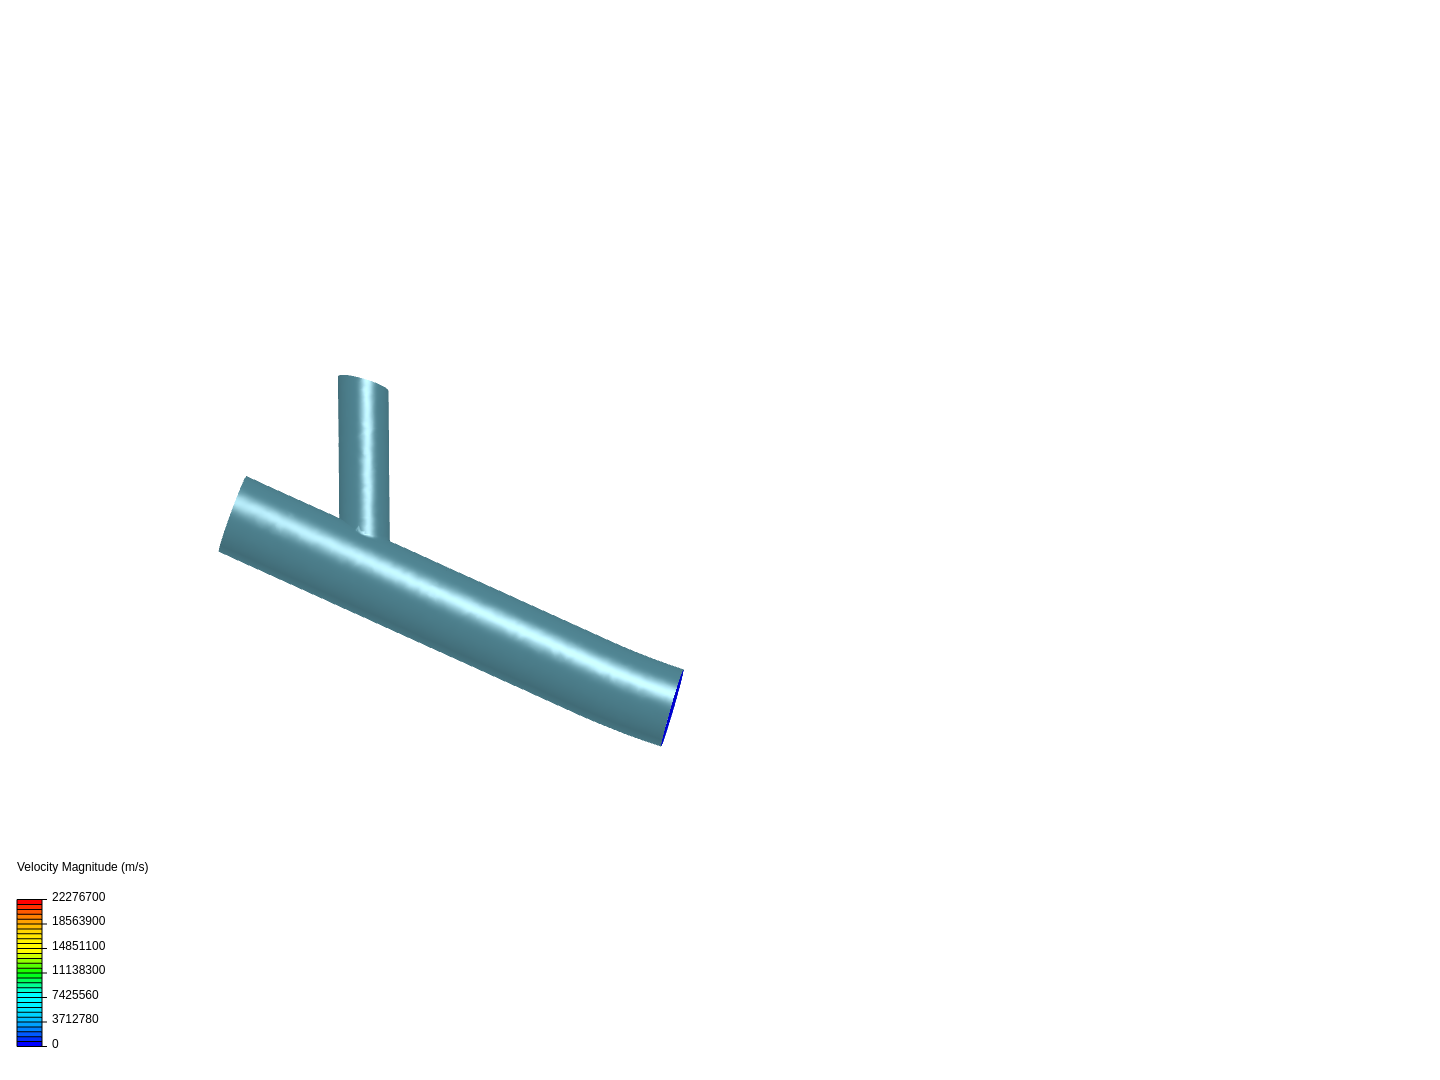 pipe flow simscale image